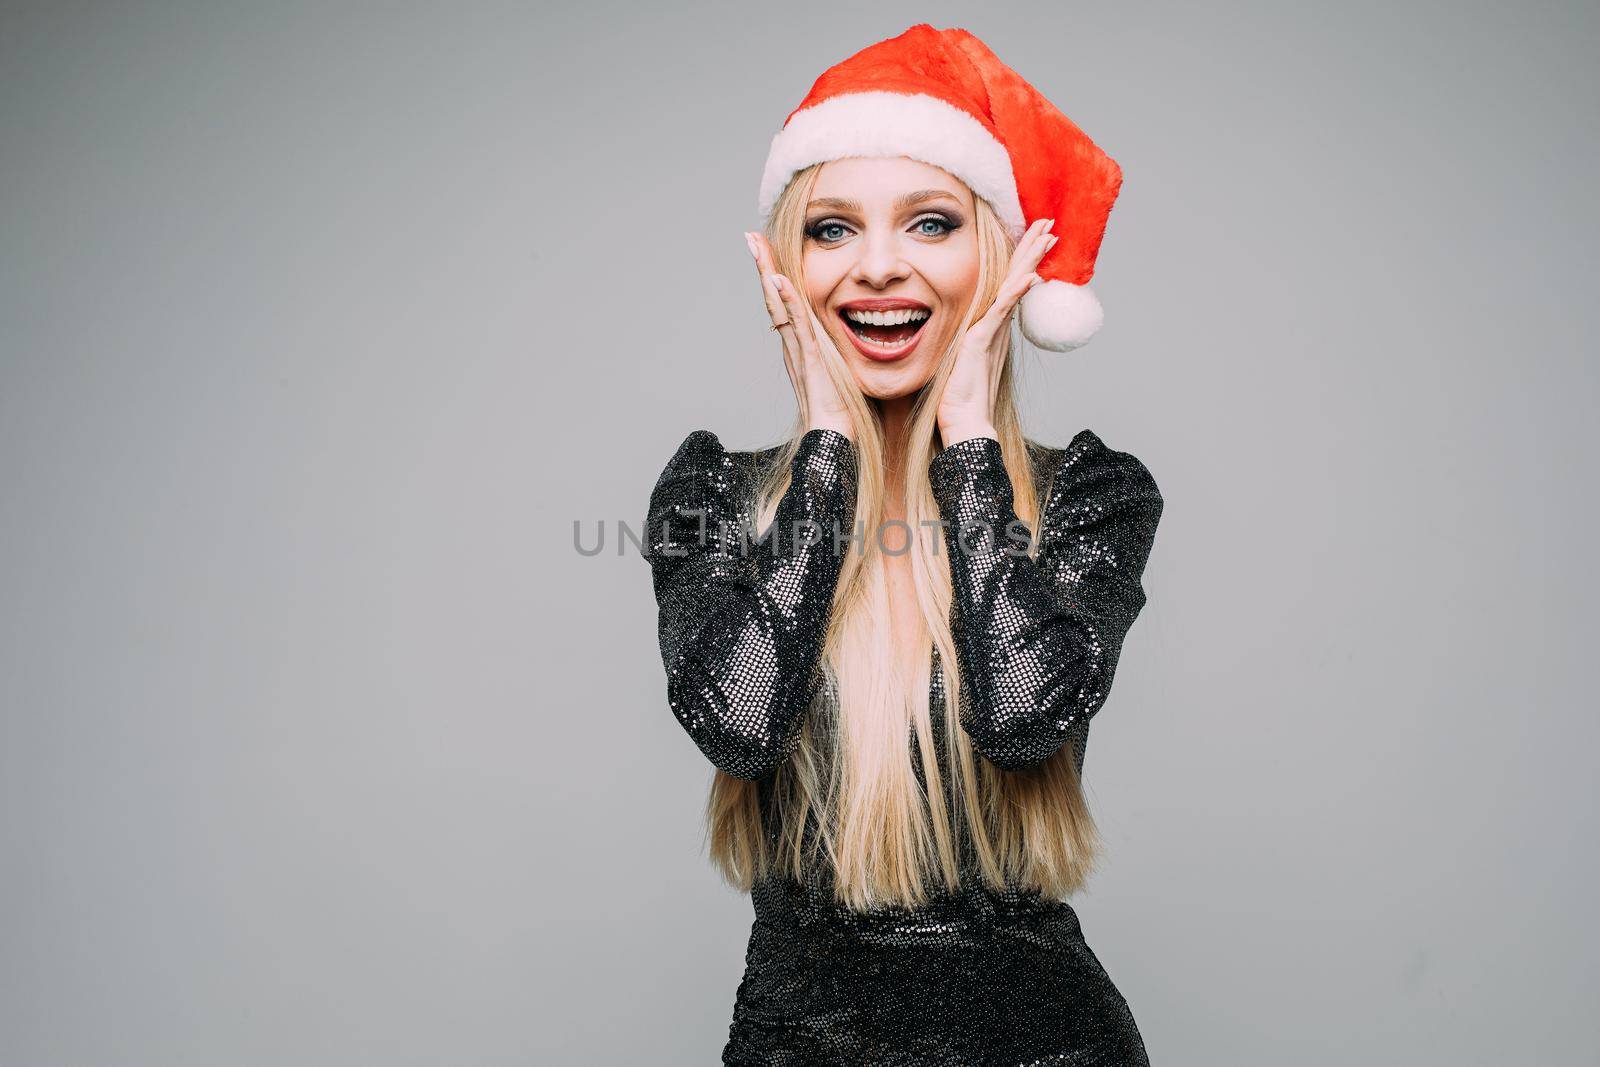 Stock photo of attractive jolly girl with long blonde hair in sparkling dark dress wearing red Santa hat holding hands at face in happiness.